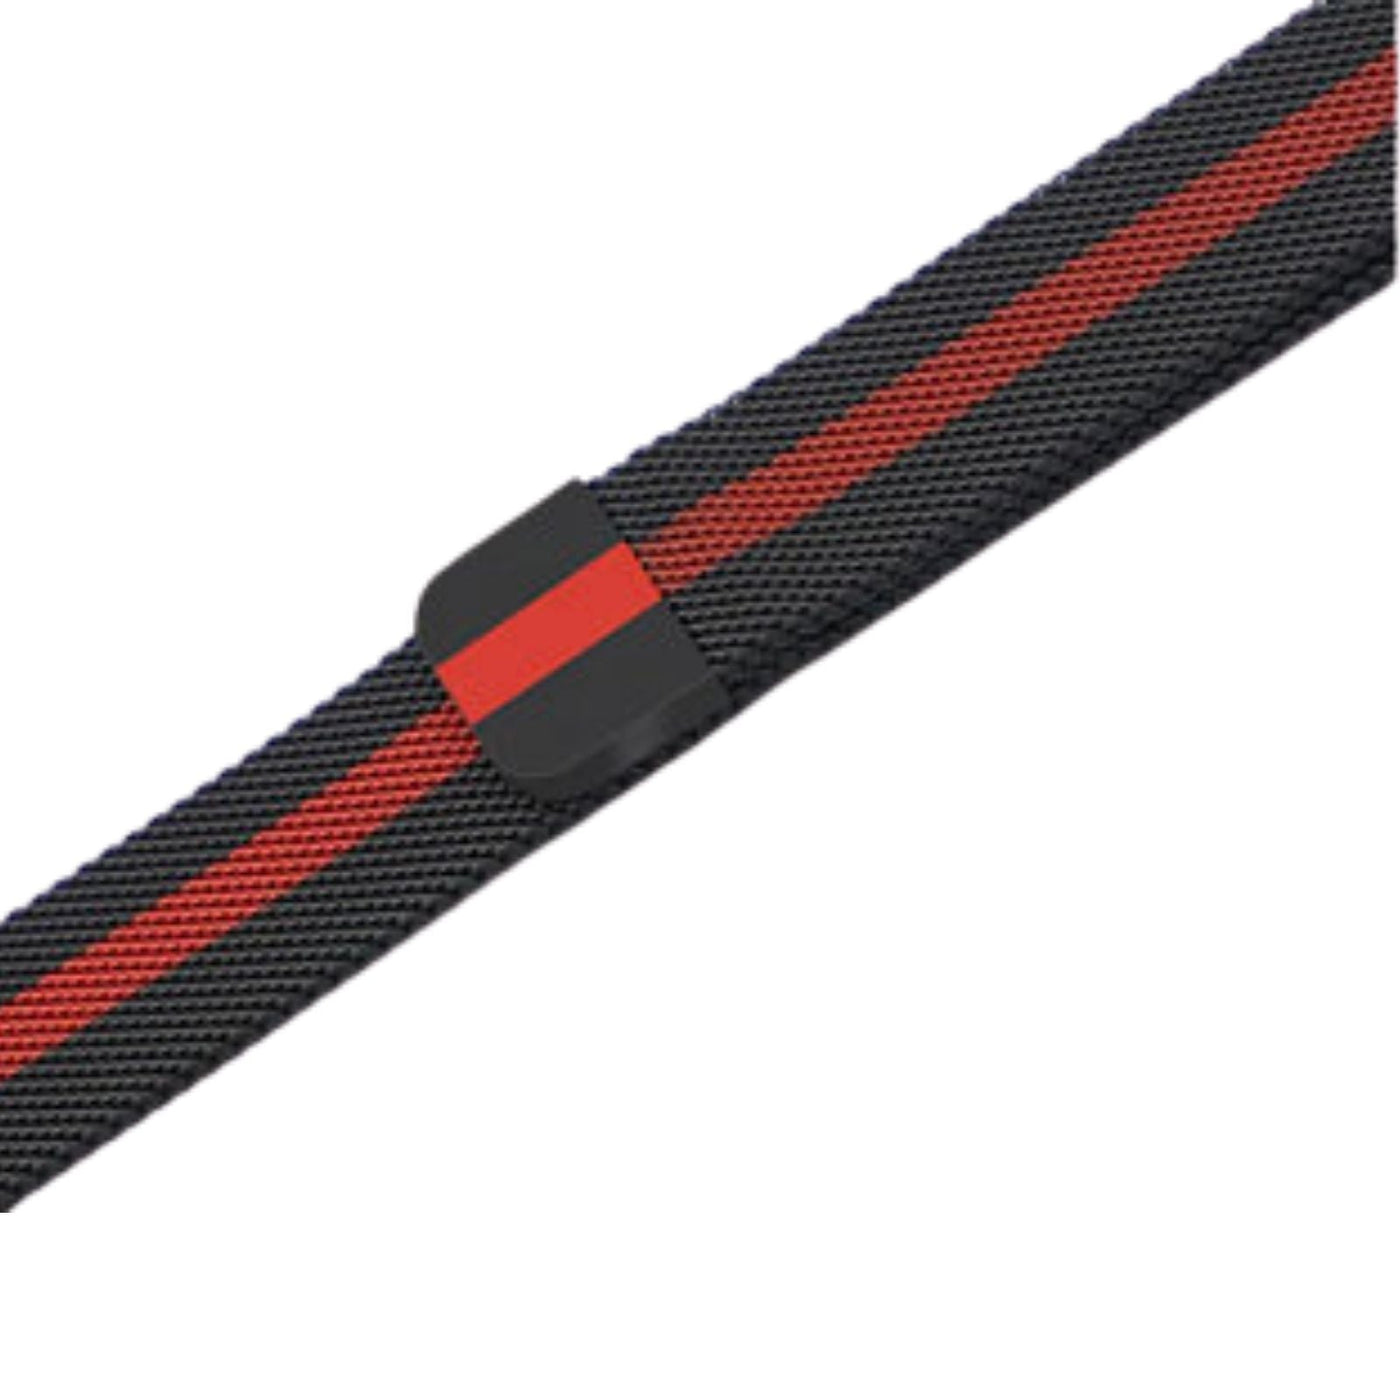 ALK Classic Milanese Band for Apple Watch in Black Red - Alk Designs